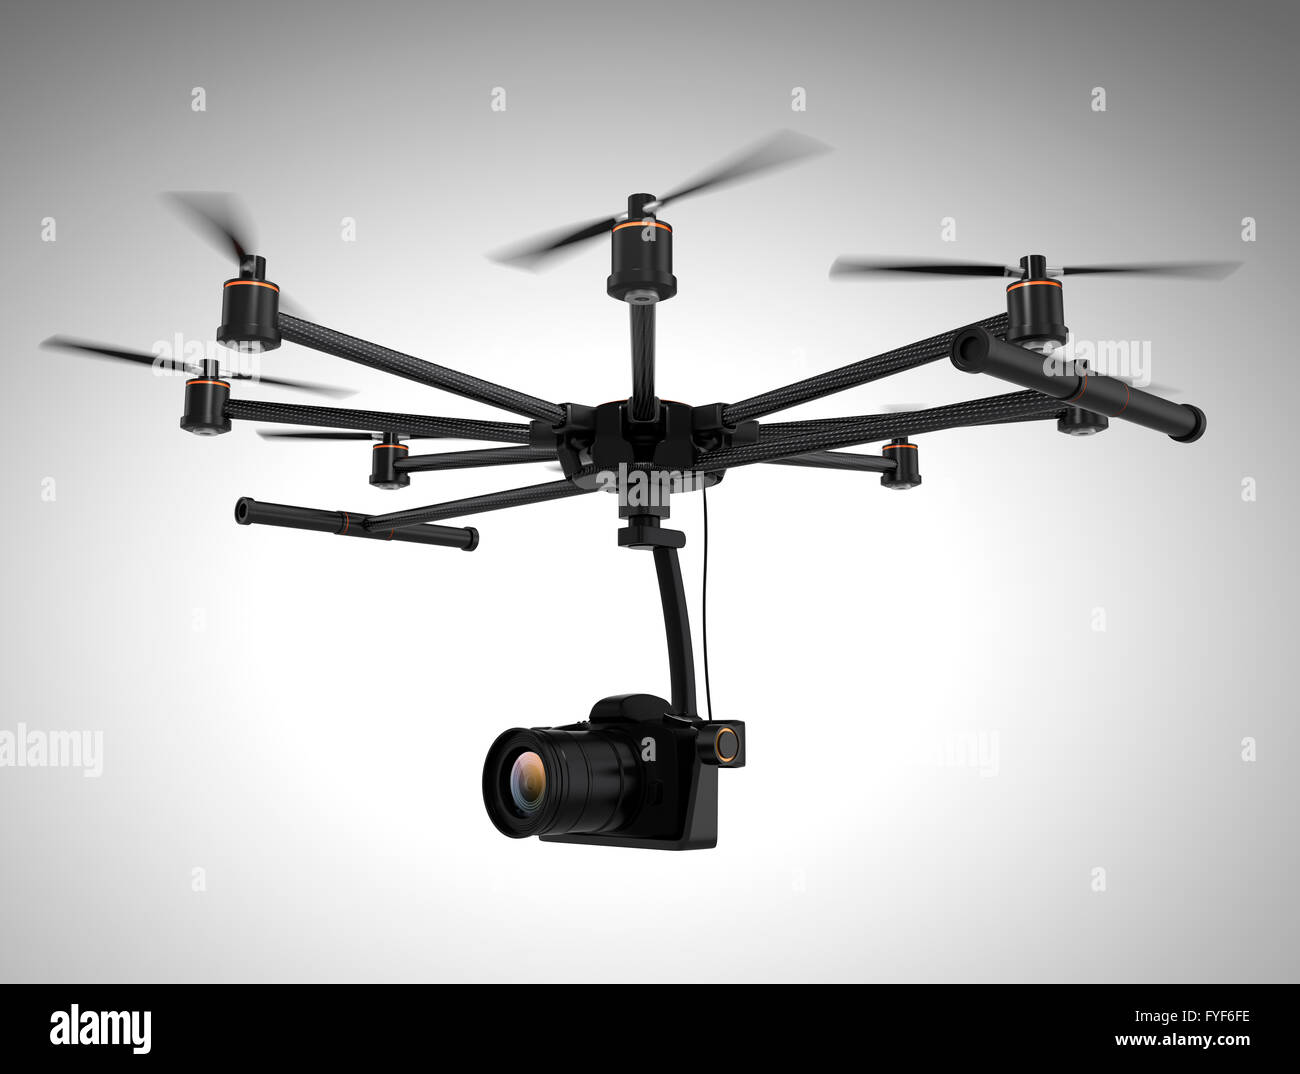 Octocopter carrying DSLR camera isolated on gray background. 3D rendering image. Stock Photo